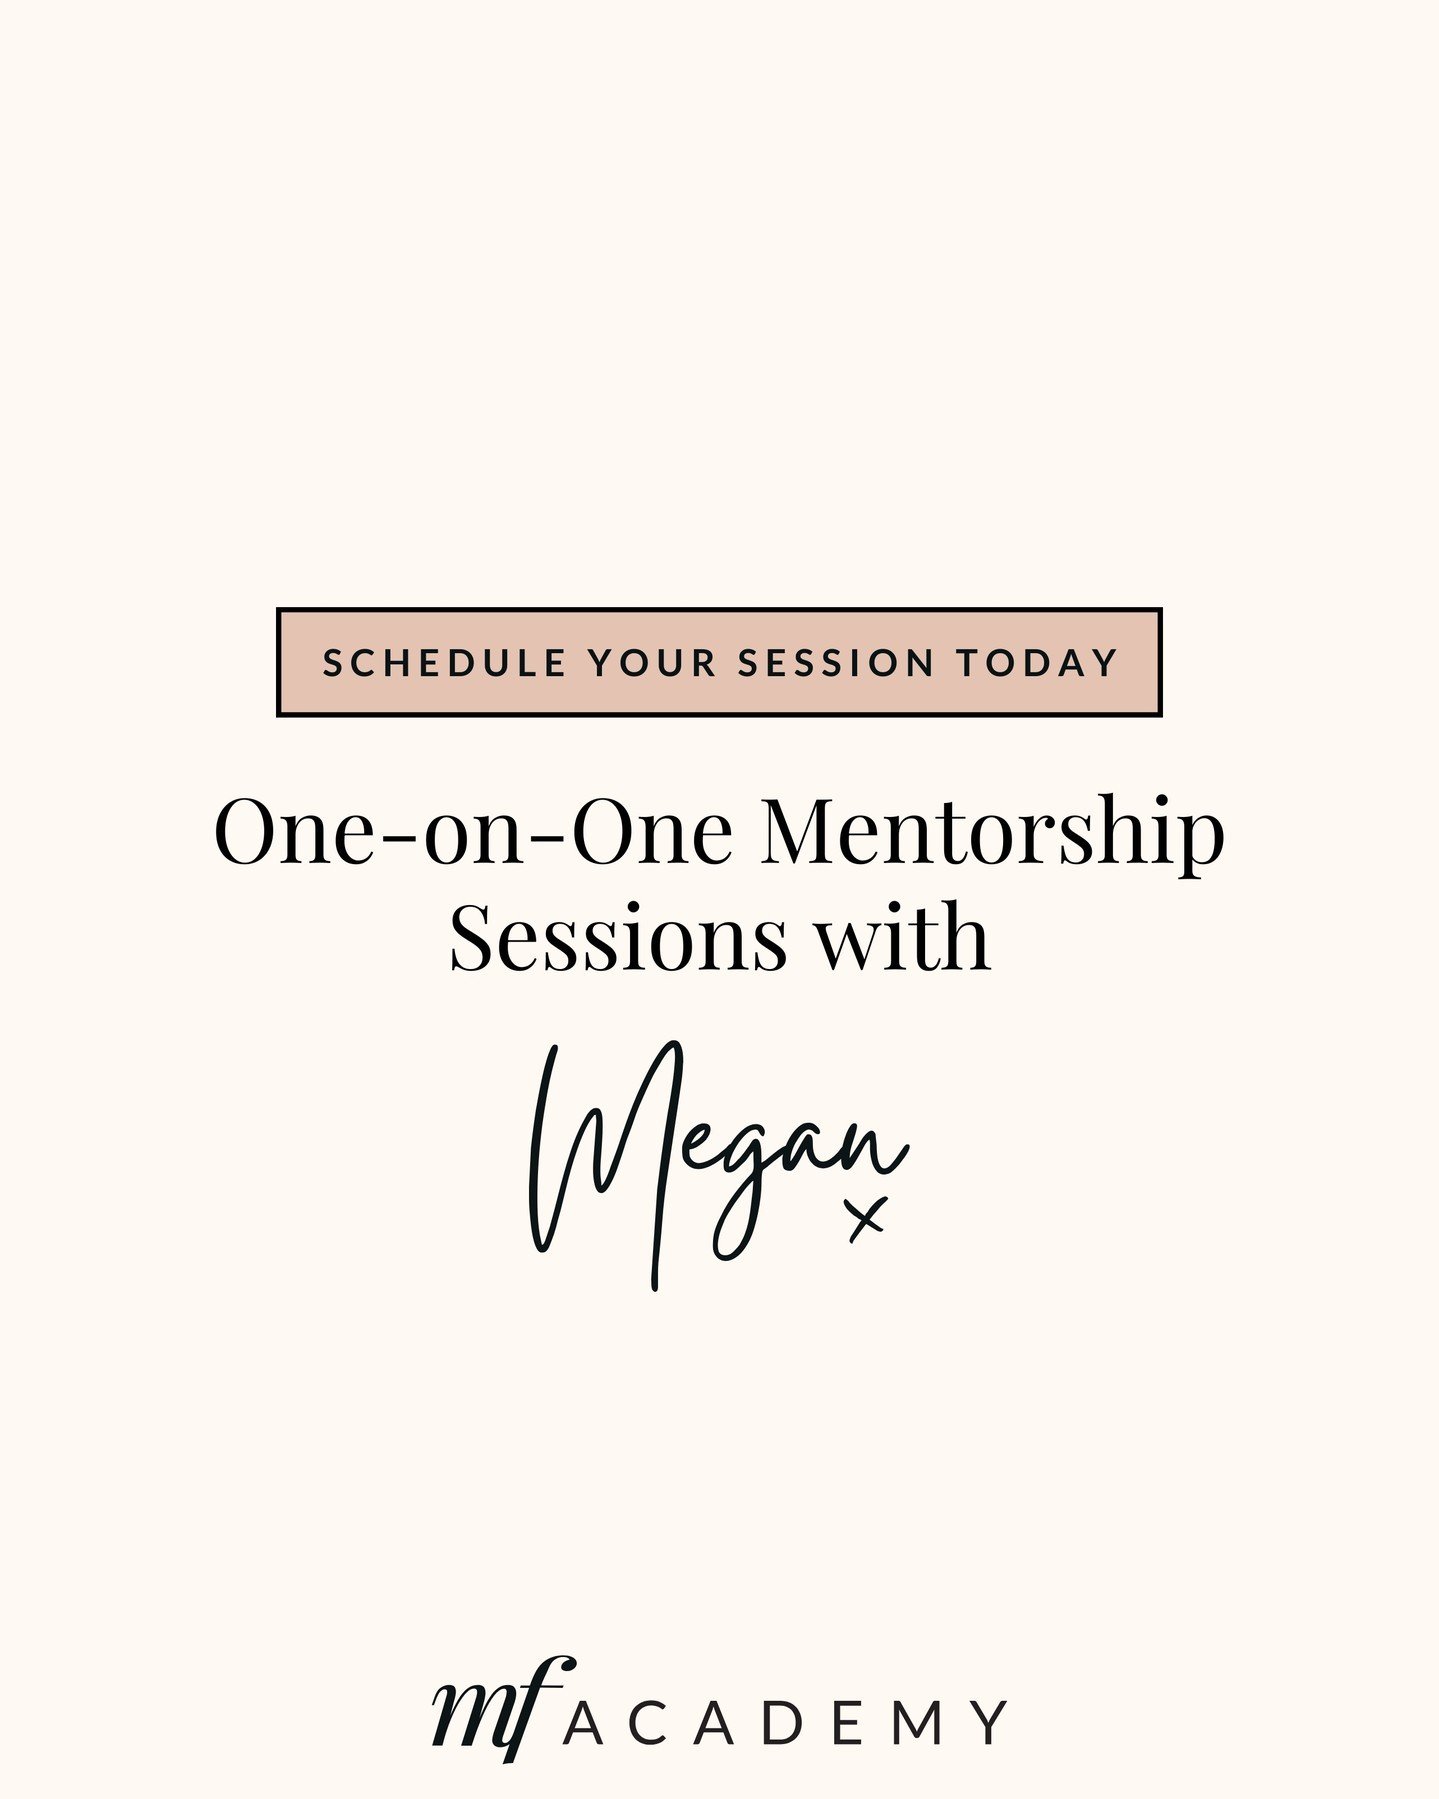 One-on-One Mentorship Sessions with Megan.🦷

Welcome to the exclusive opportunity of one-on-one mentorship sessions with me, Megan Fairhall, a renowned dental professional and expert in teeth whitening and dental marketing.

Don't miss out on this e